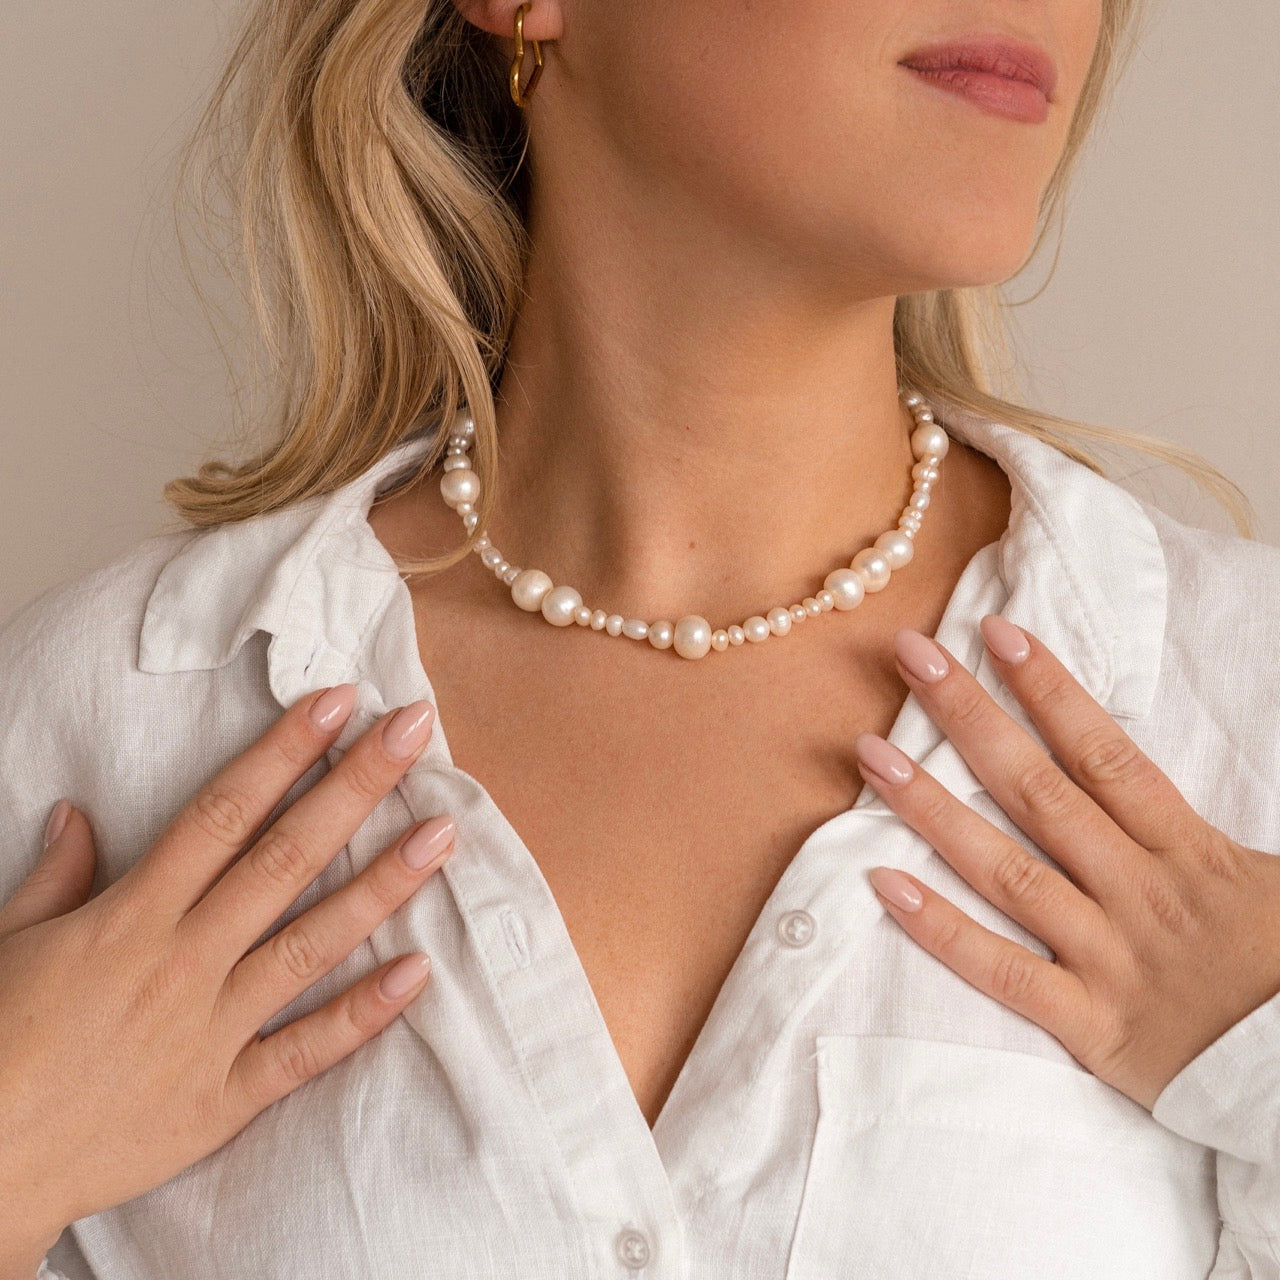 Baroque pearl necklace: big baroque pearls making a chunky simple necklace  - Melbourne Pearls